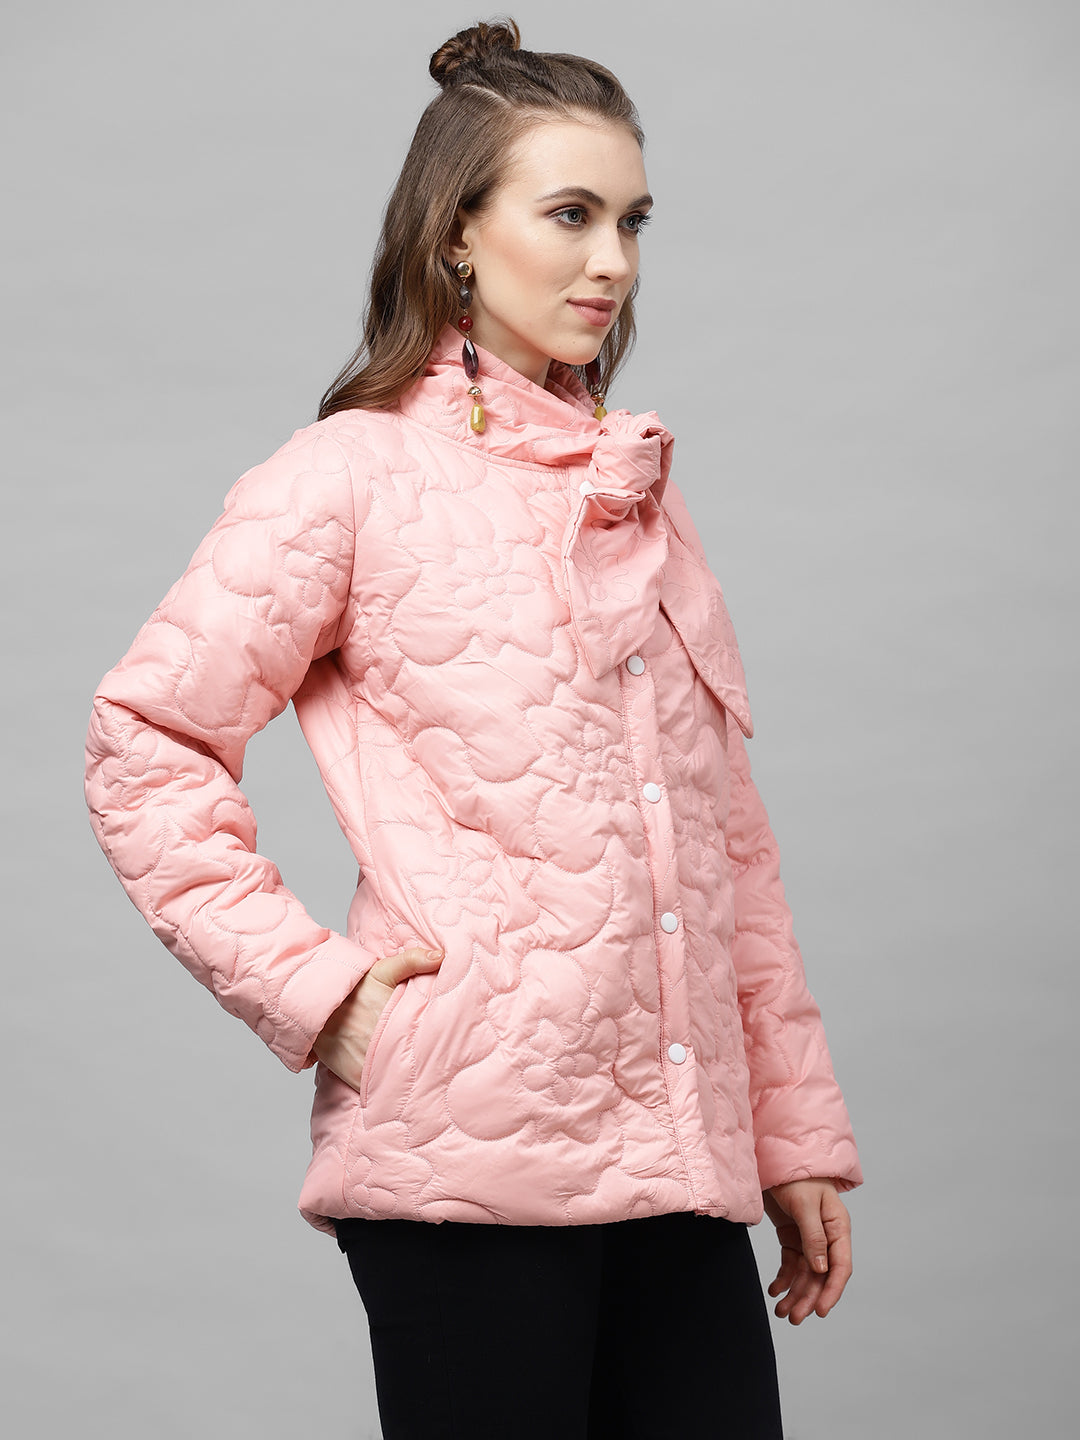 Athena Women Pink Solid Lightweight Quilted Jacket - Athena Lifestyle